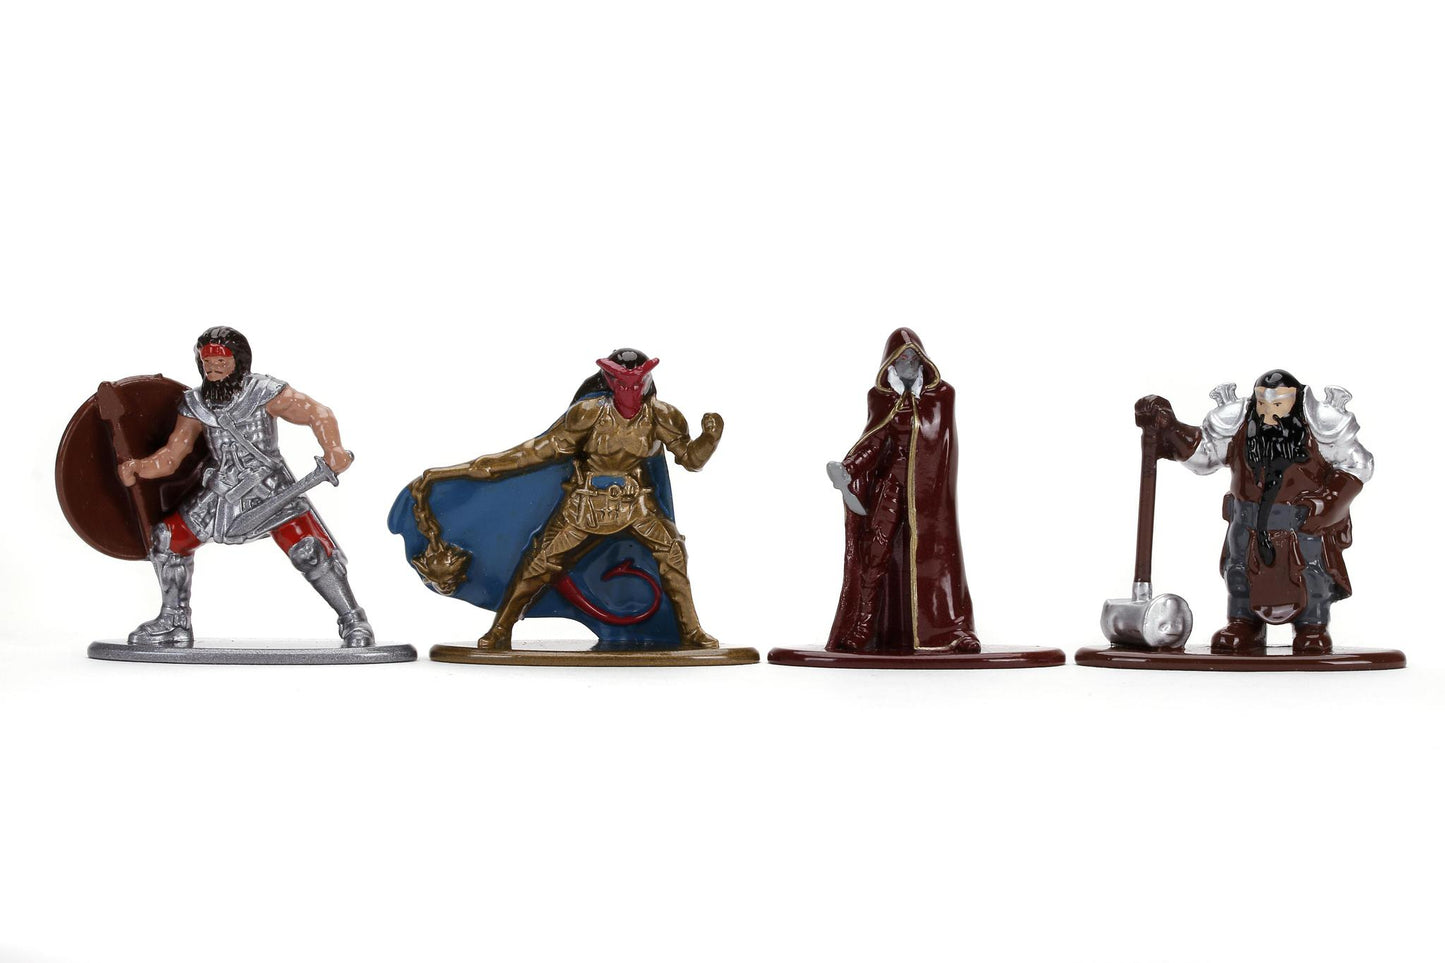 Jada Toys Nano METALFIGS Dungeons & Dragons Deluxe Pack, Die-Cast Collectible Figures